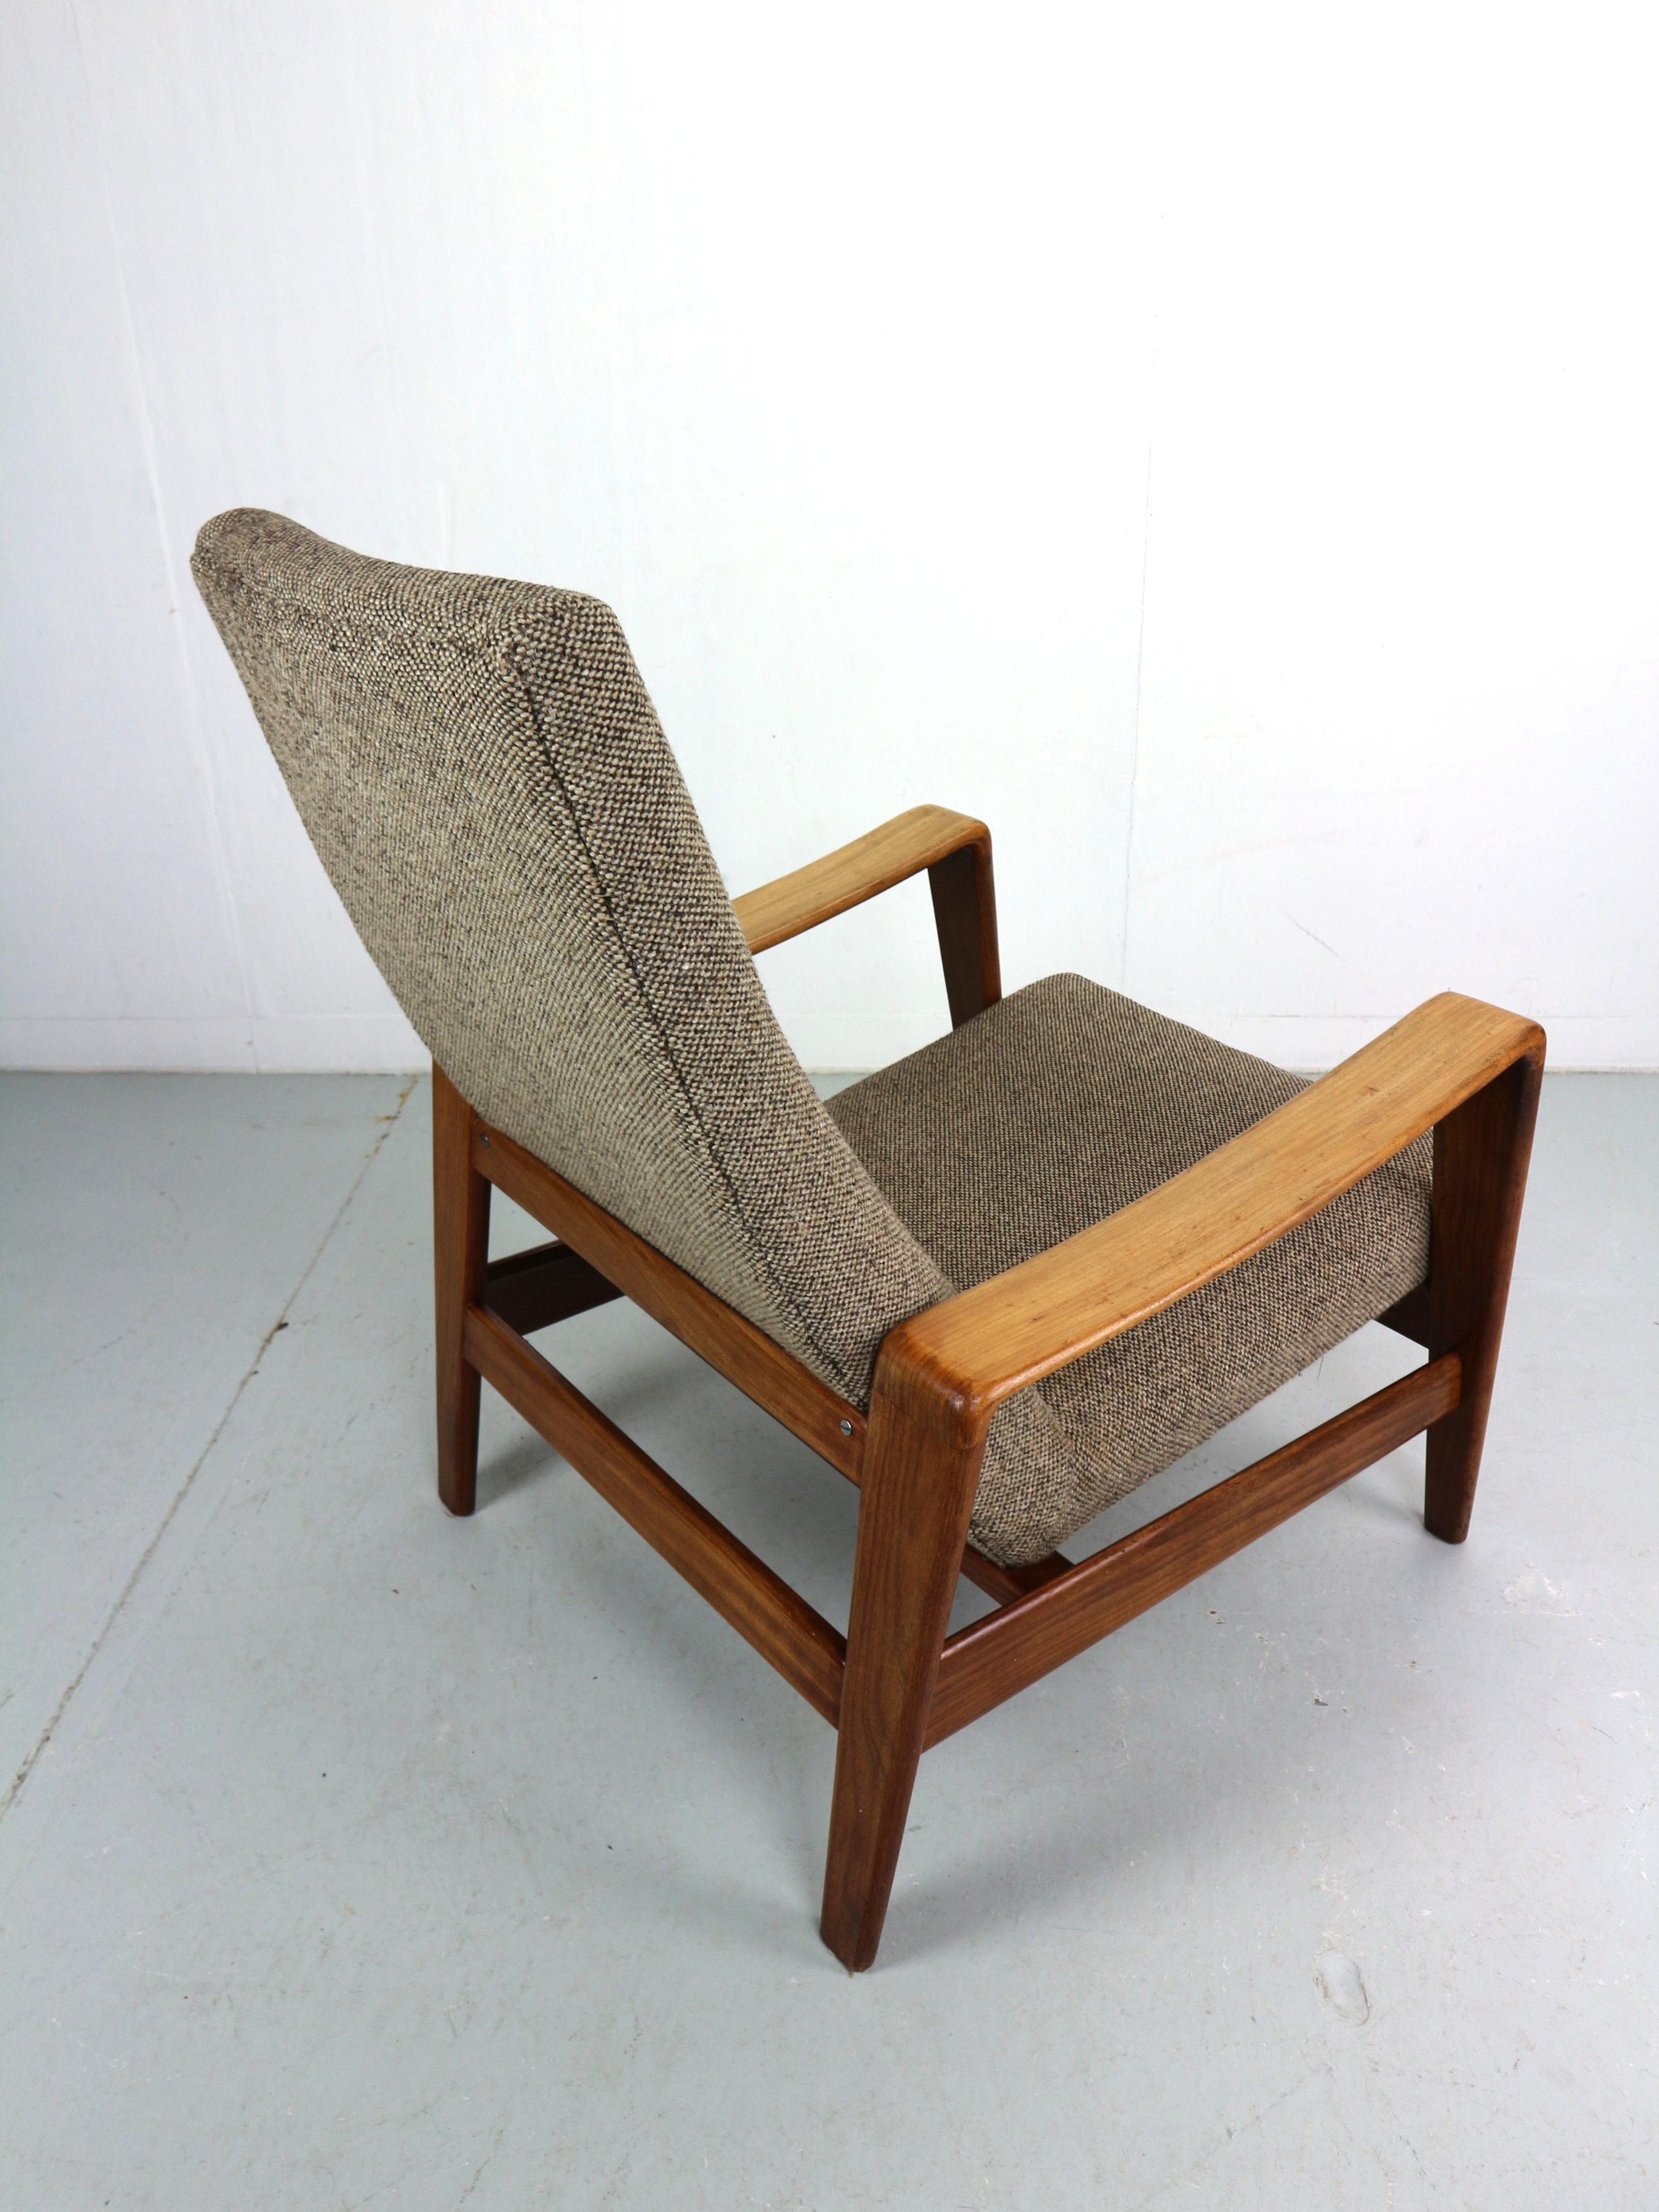 20th Century Lounge Chair by Arne Wahl Iversen for Komfort, 1960s For Sale